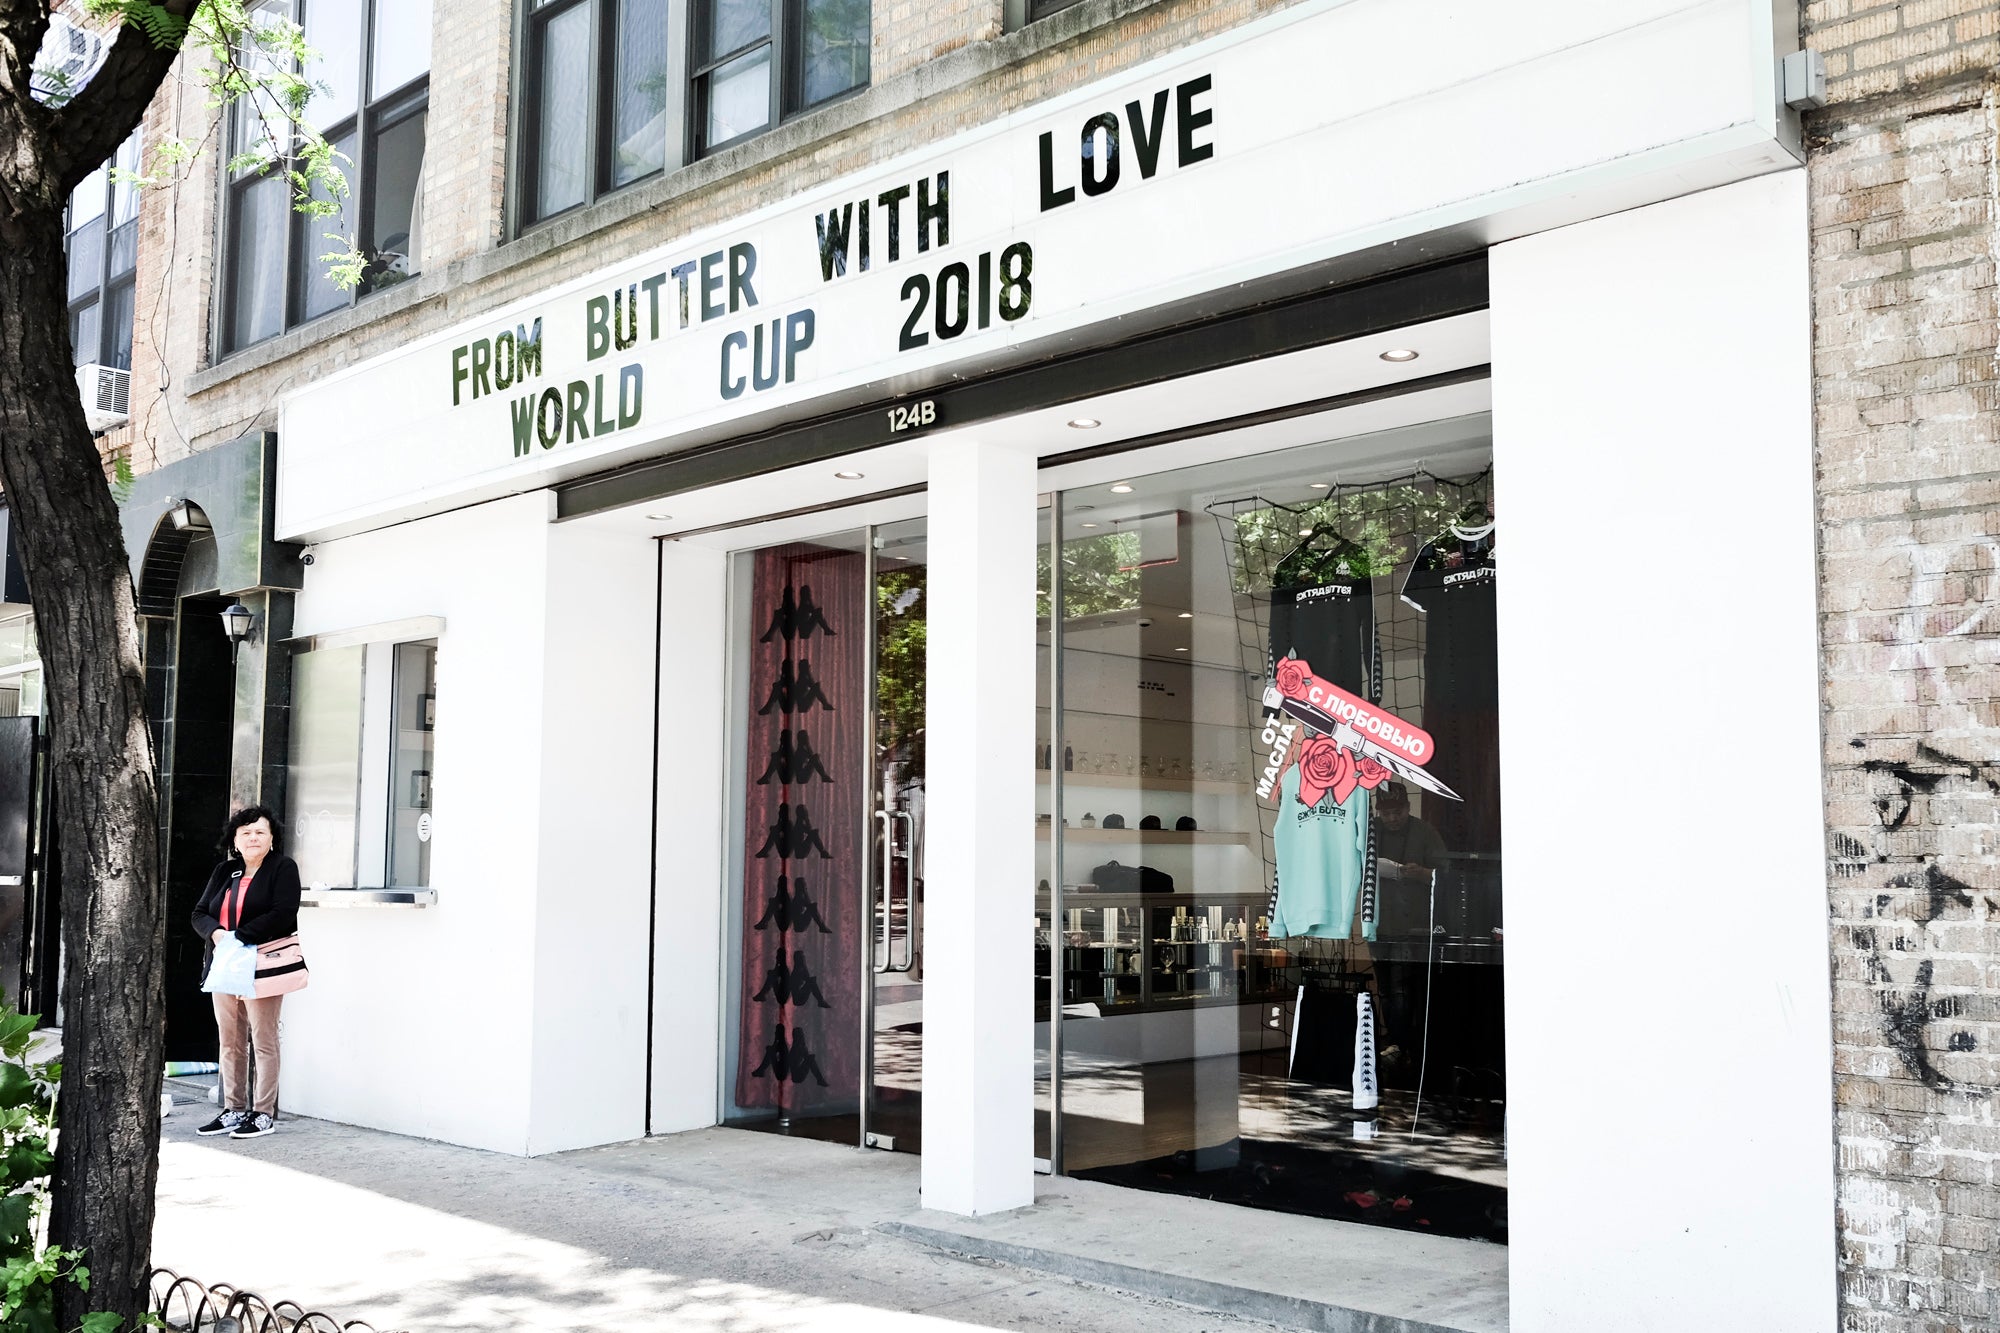 “From Butter, With Love” World Cup Capsule - In-Store Display article image